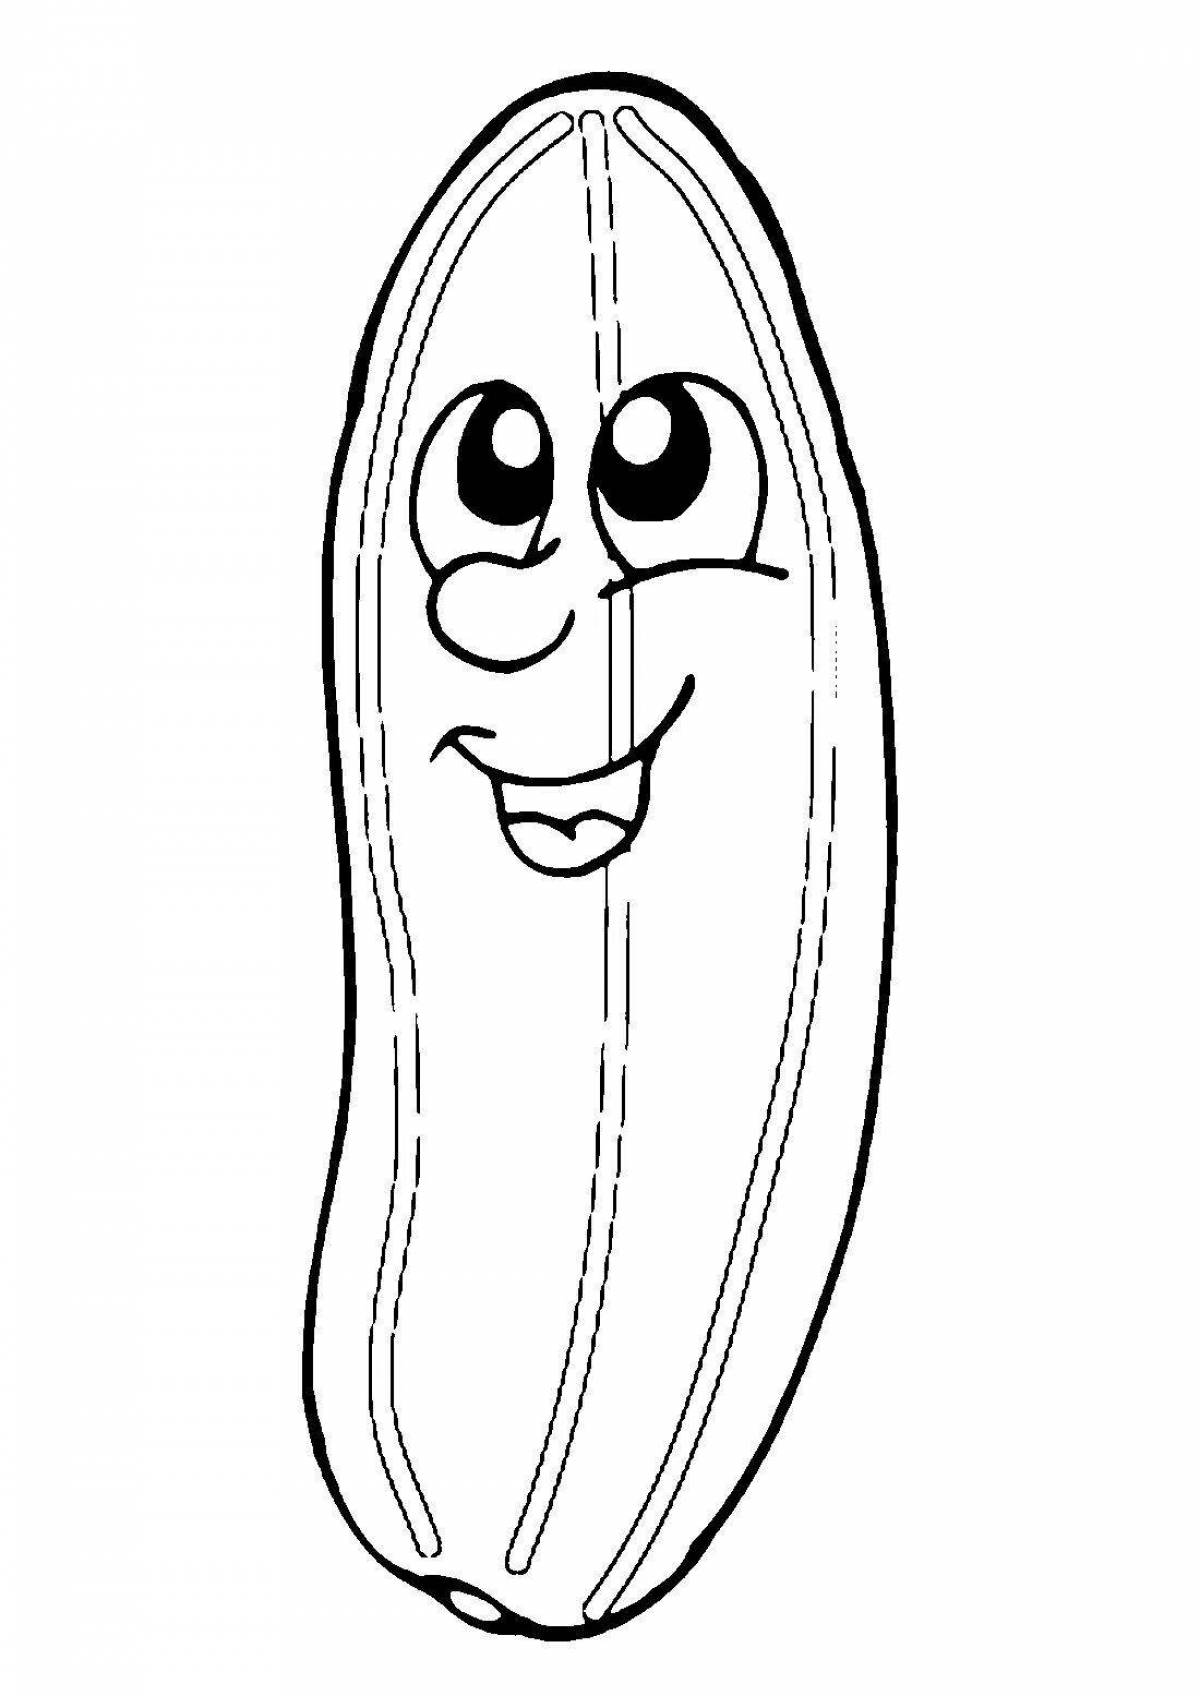 Inspirational zucchini coloring book for kids